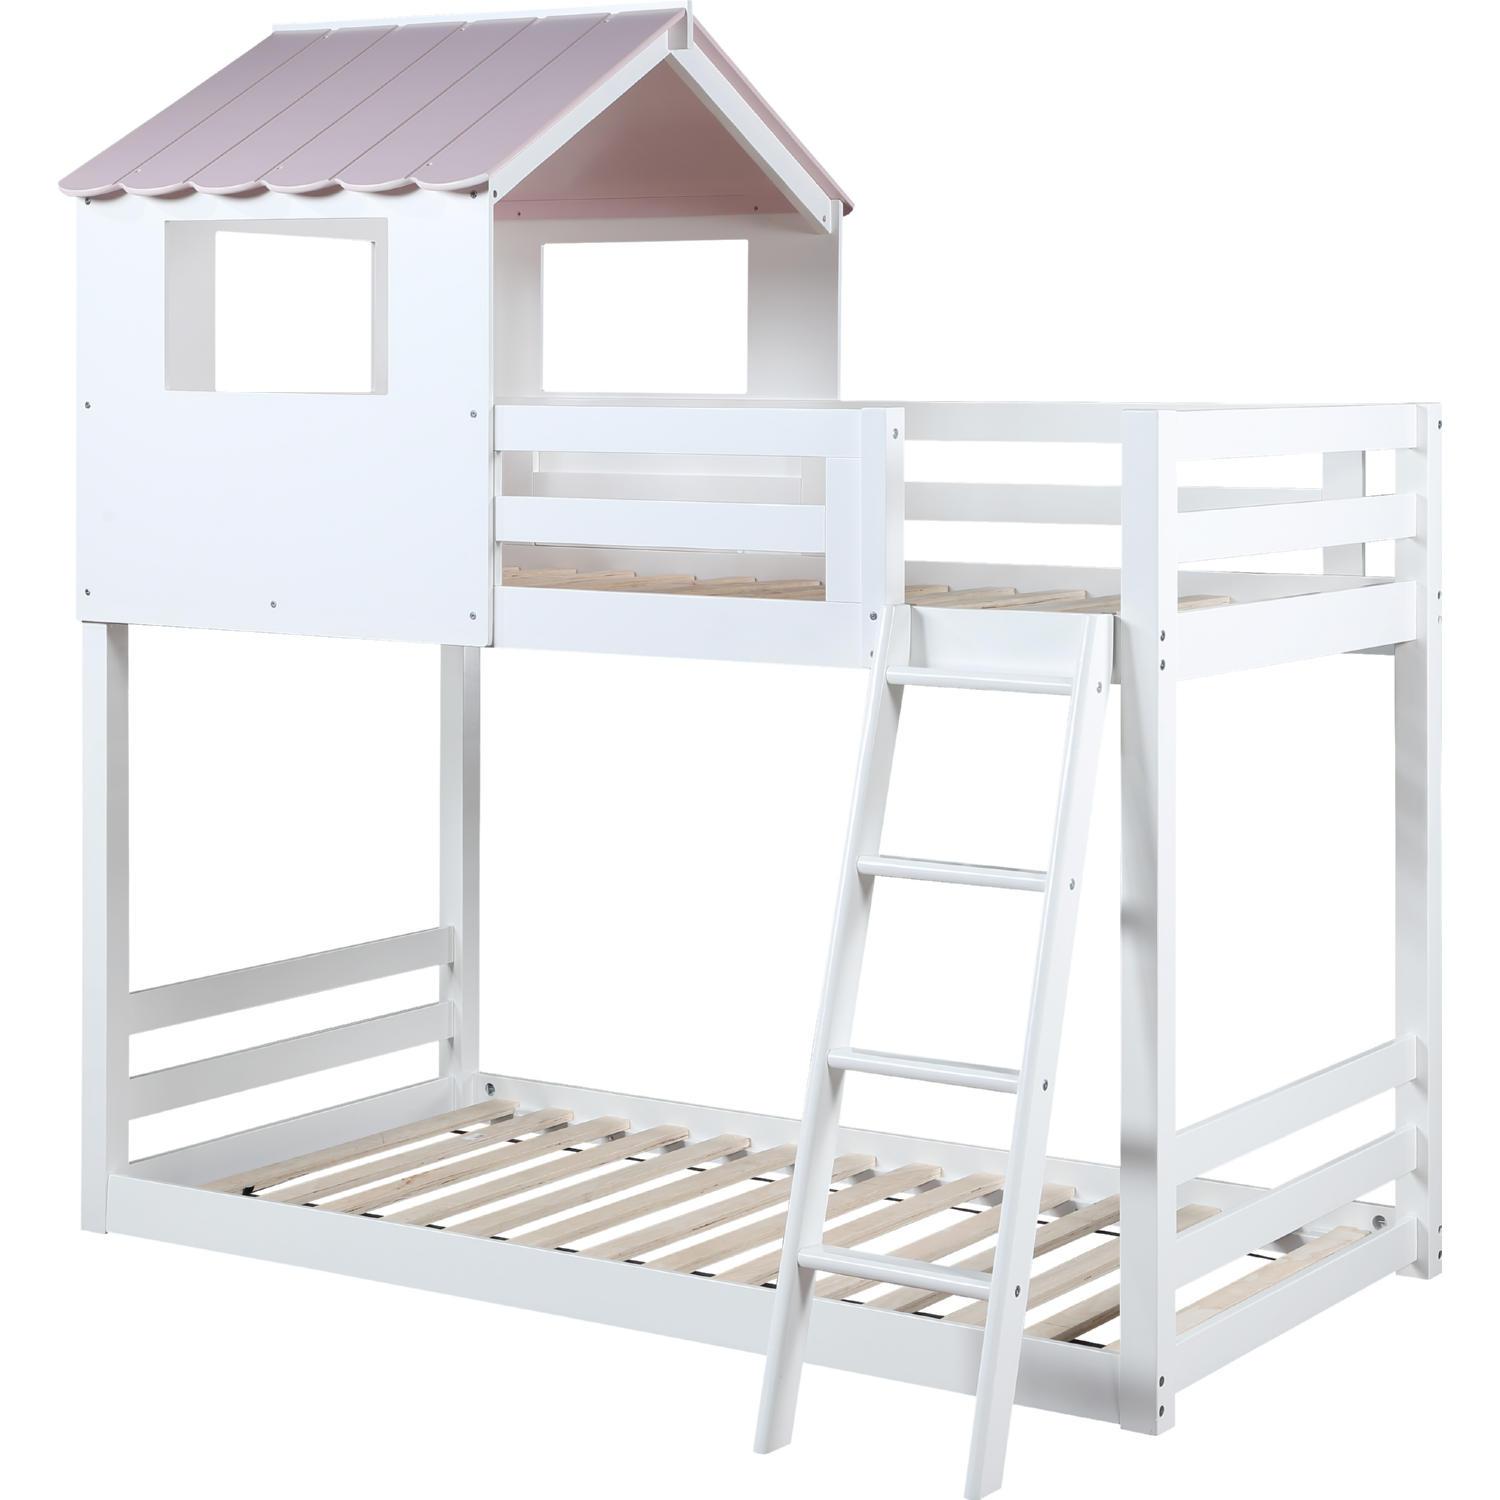 Transitional, Cottage Twin/Twin Bunk Bed Solenne BD00705 in White, Pink 